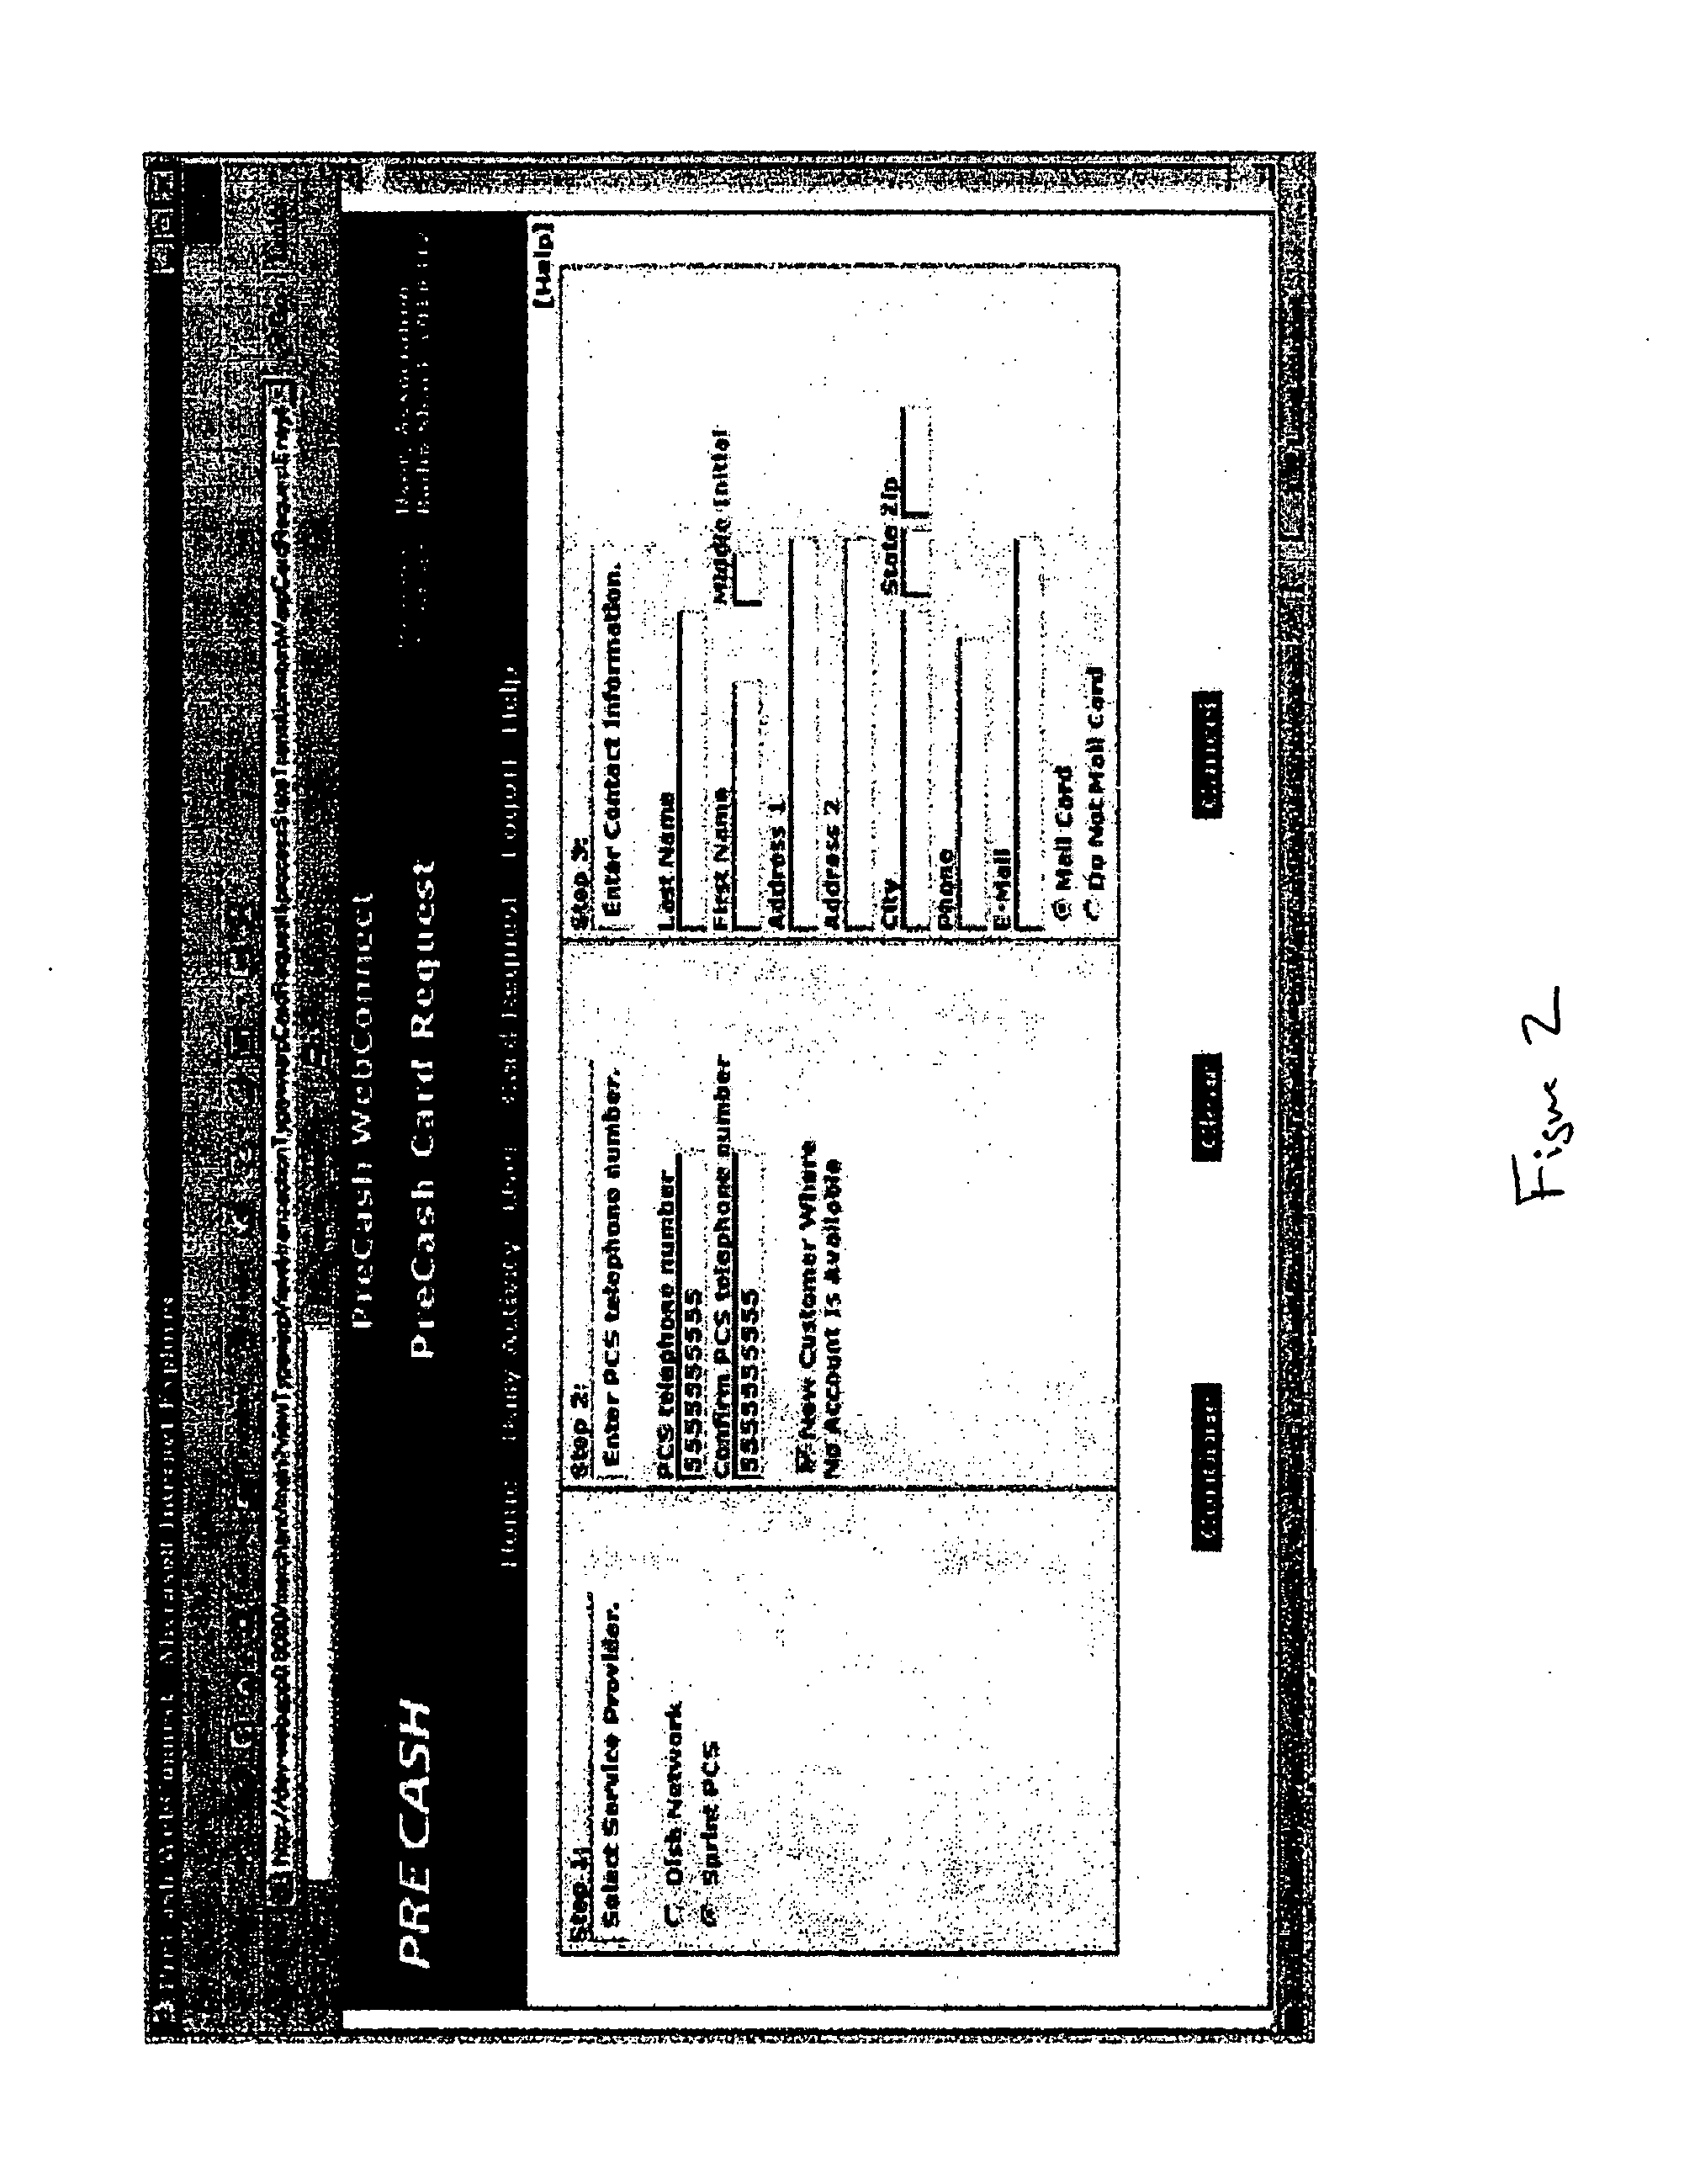 System and method for facilitating payment transactions